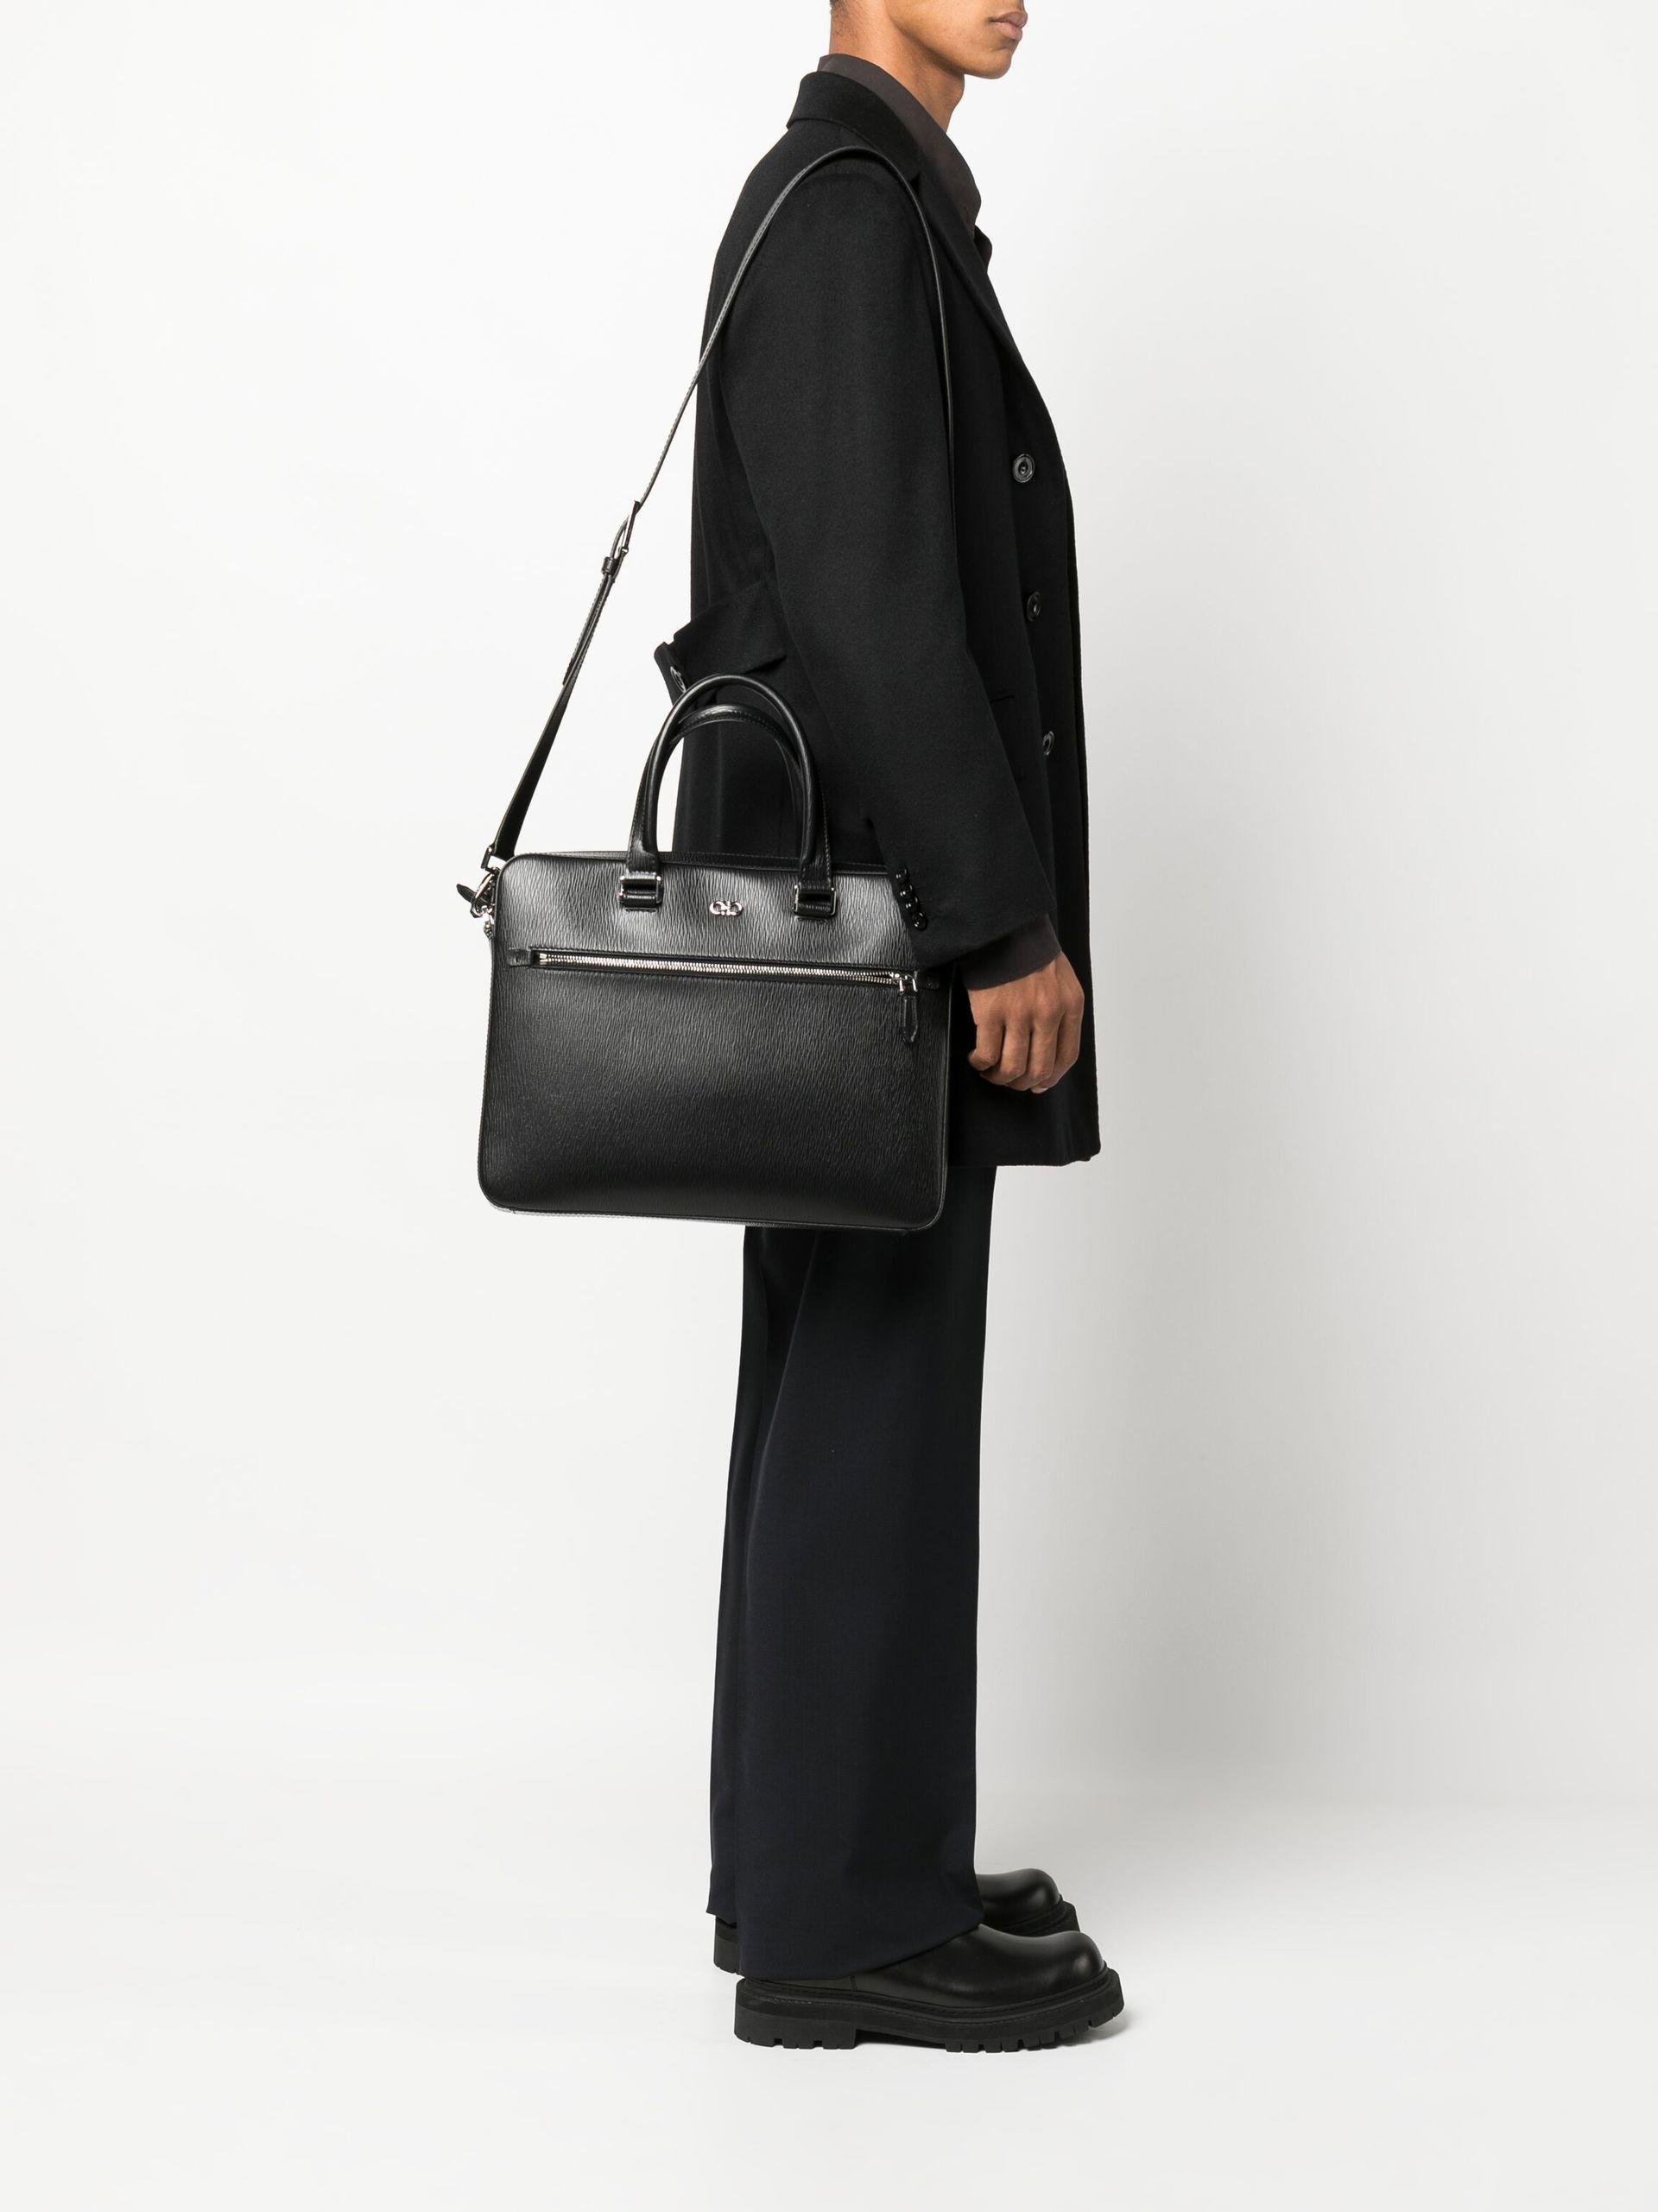 Mens Bags Briefcases and laptop bags Ferragamo Leather Gancini Briefcase in Black for Men 